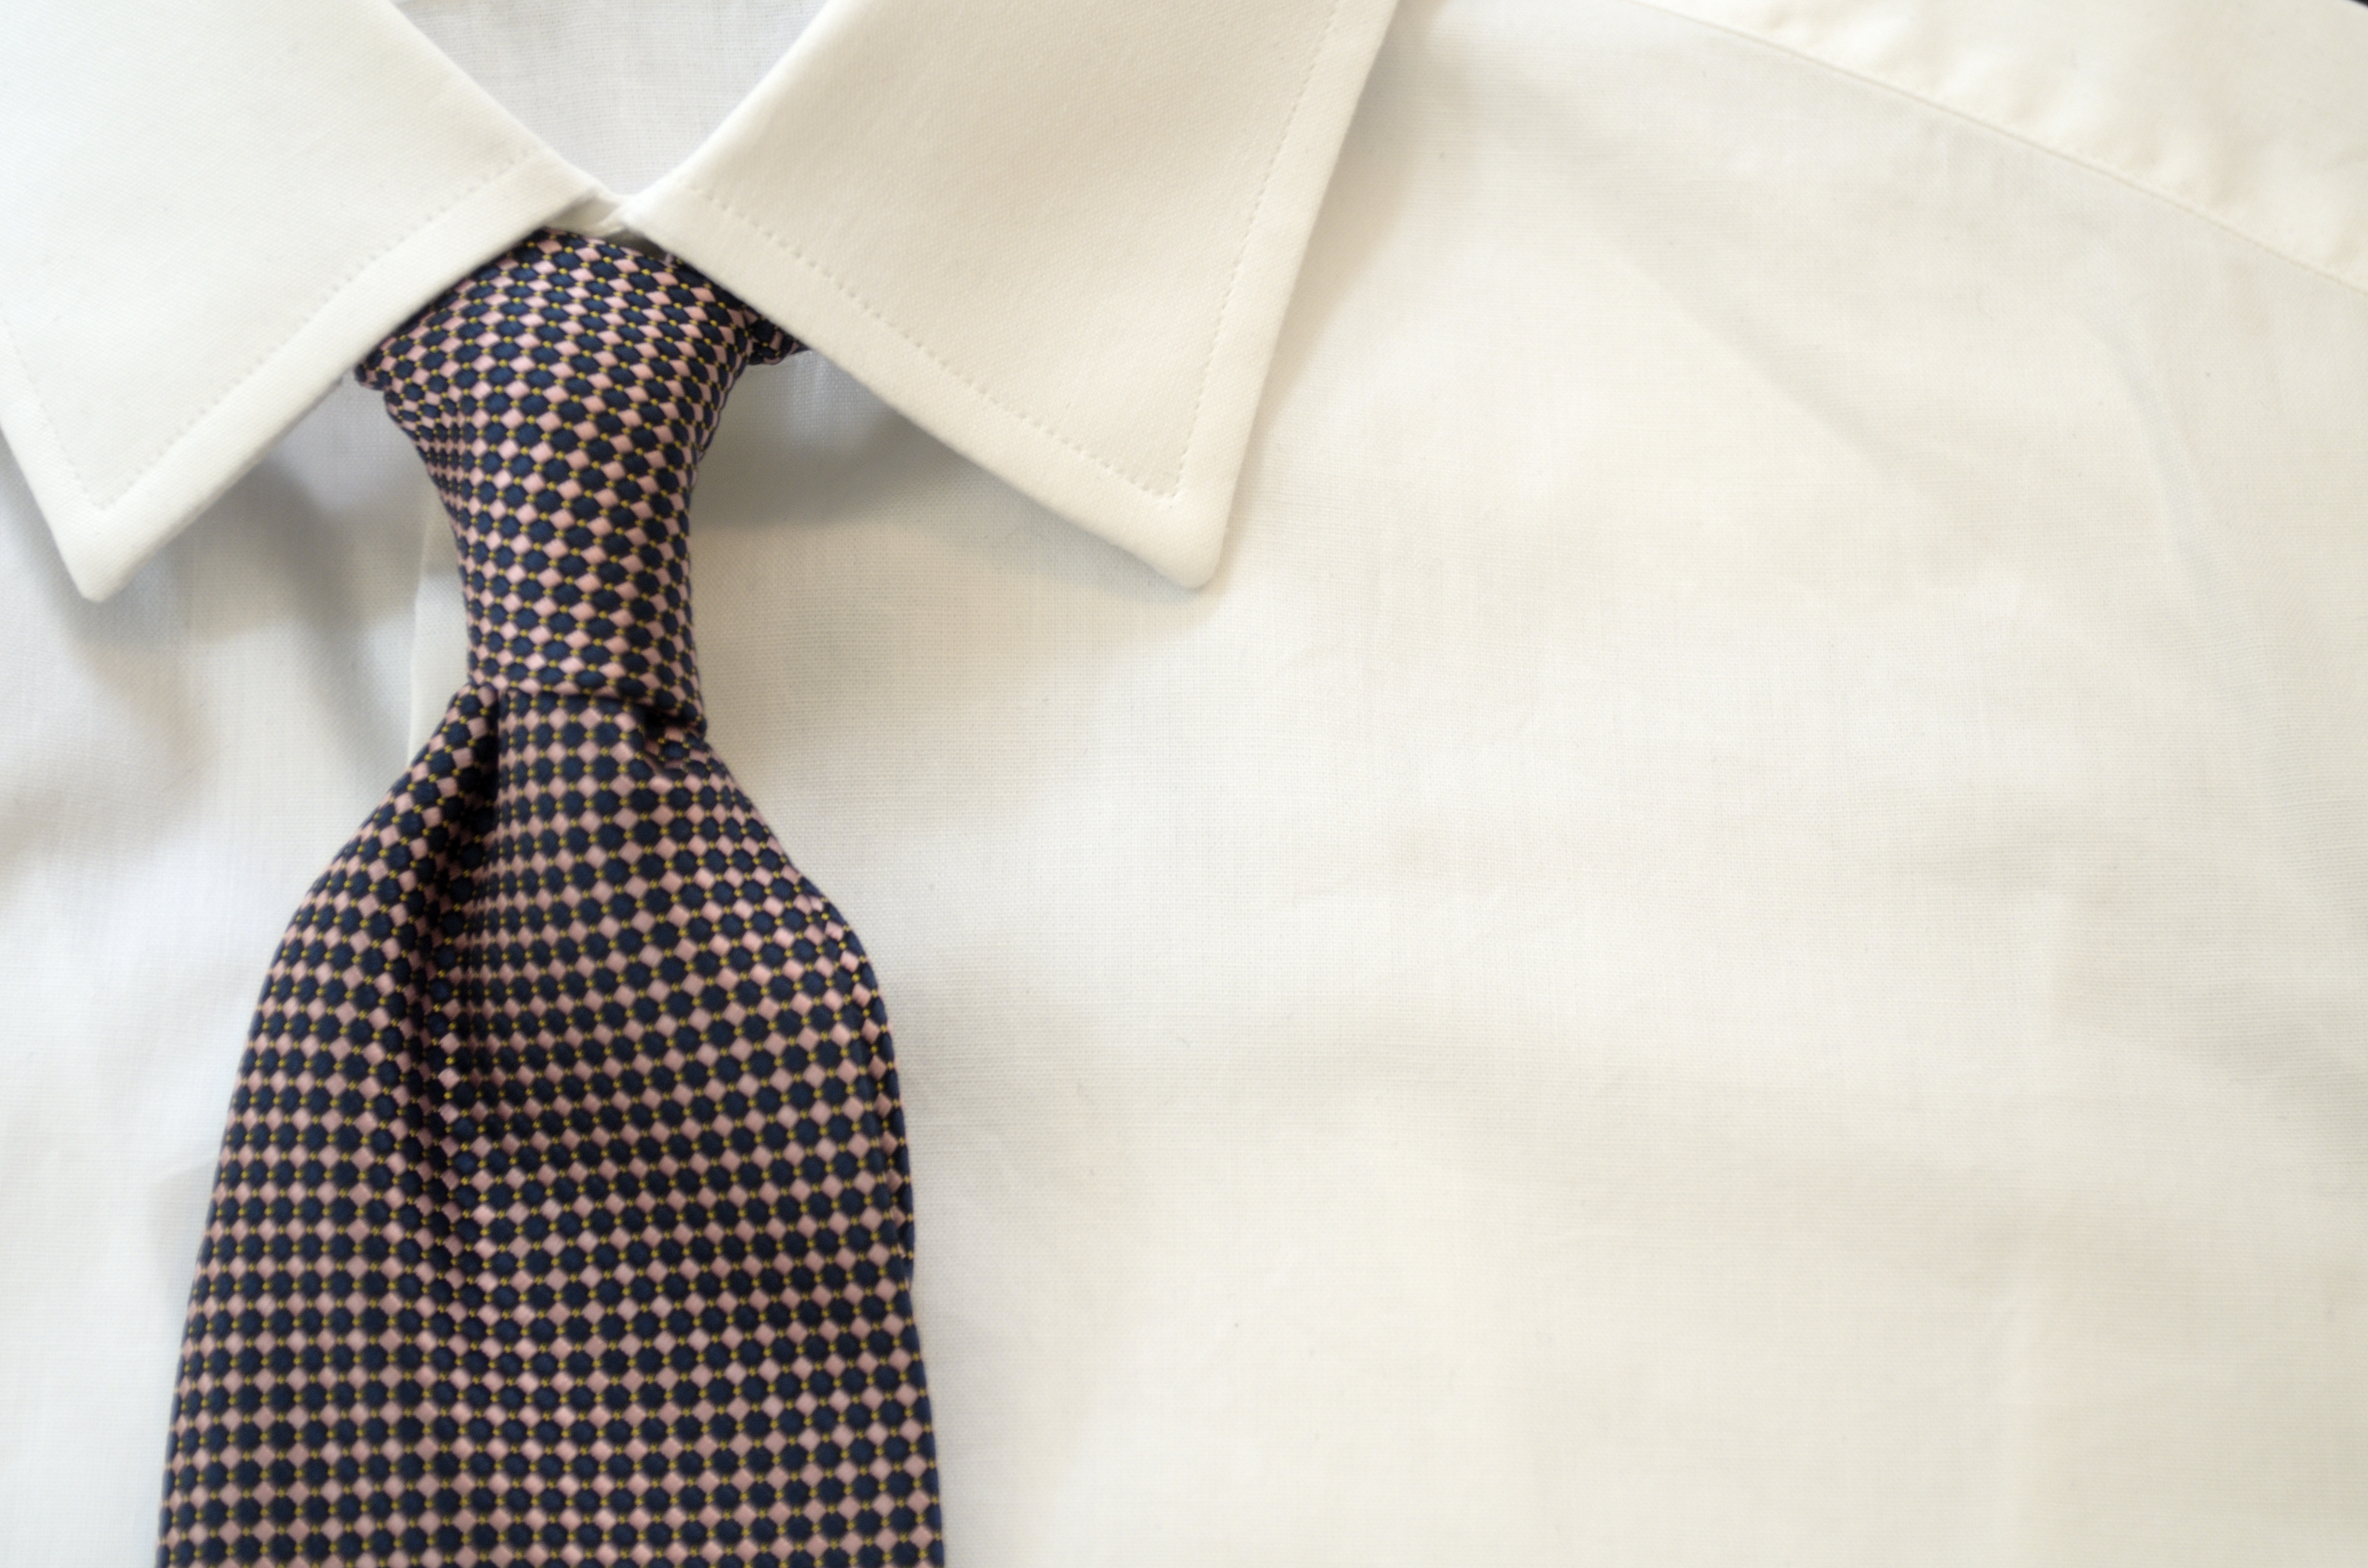 caring for men's ties